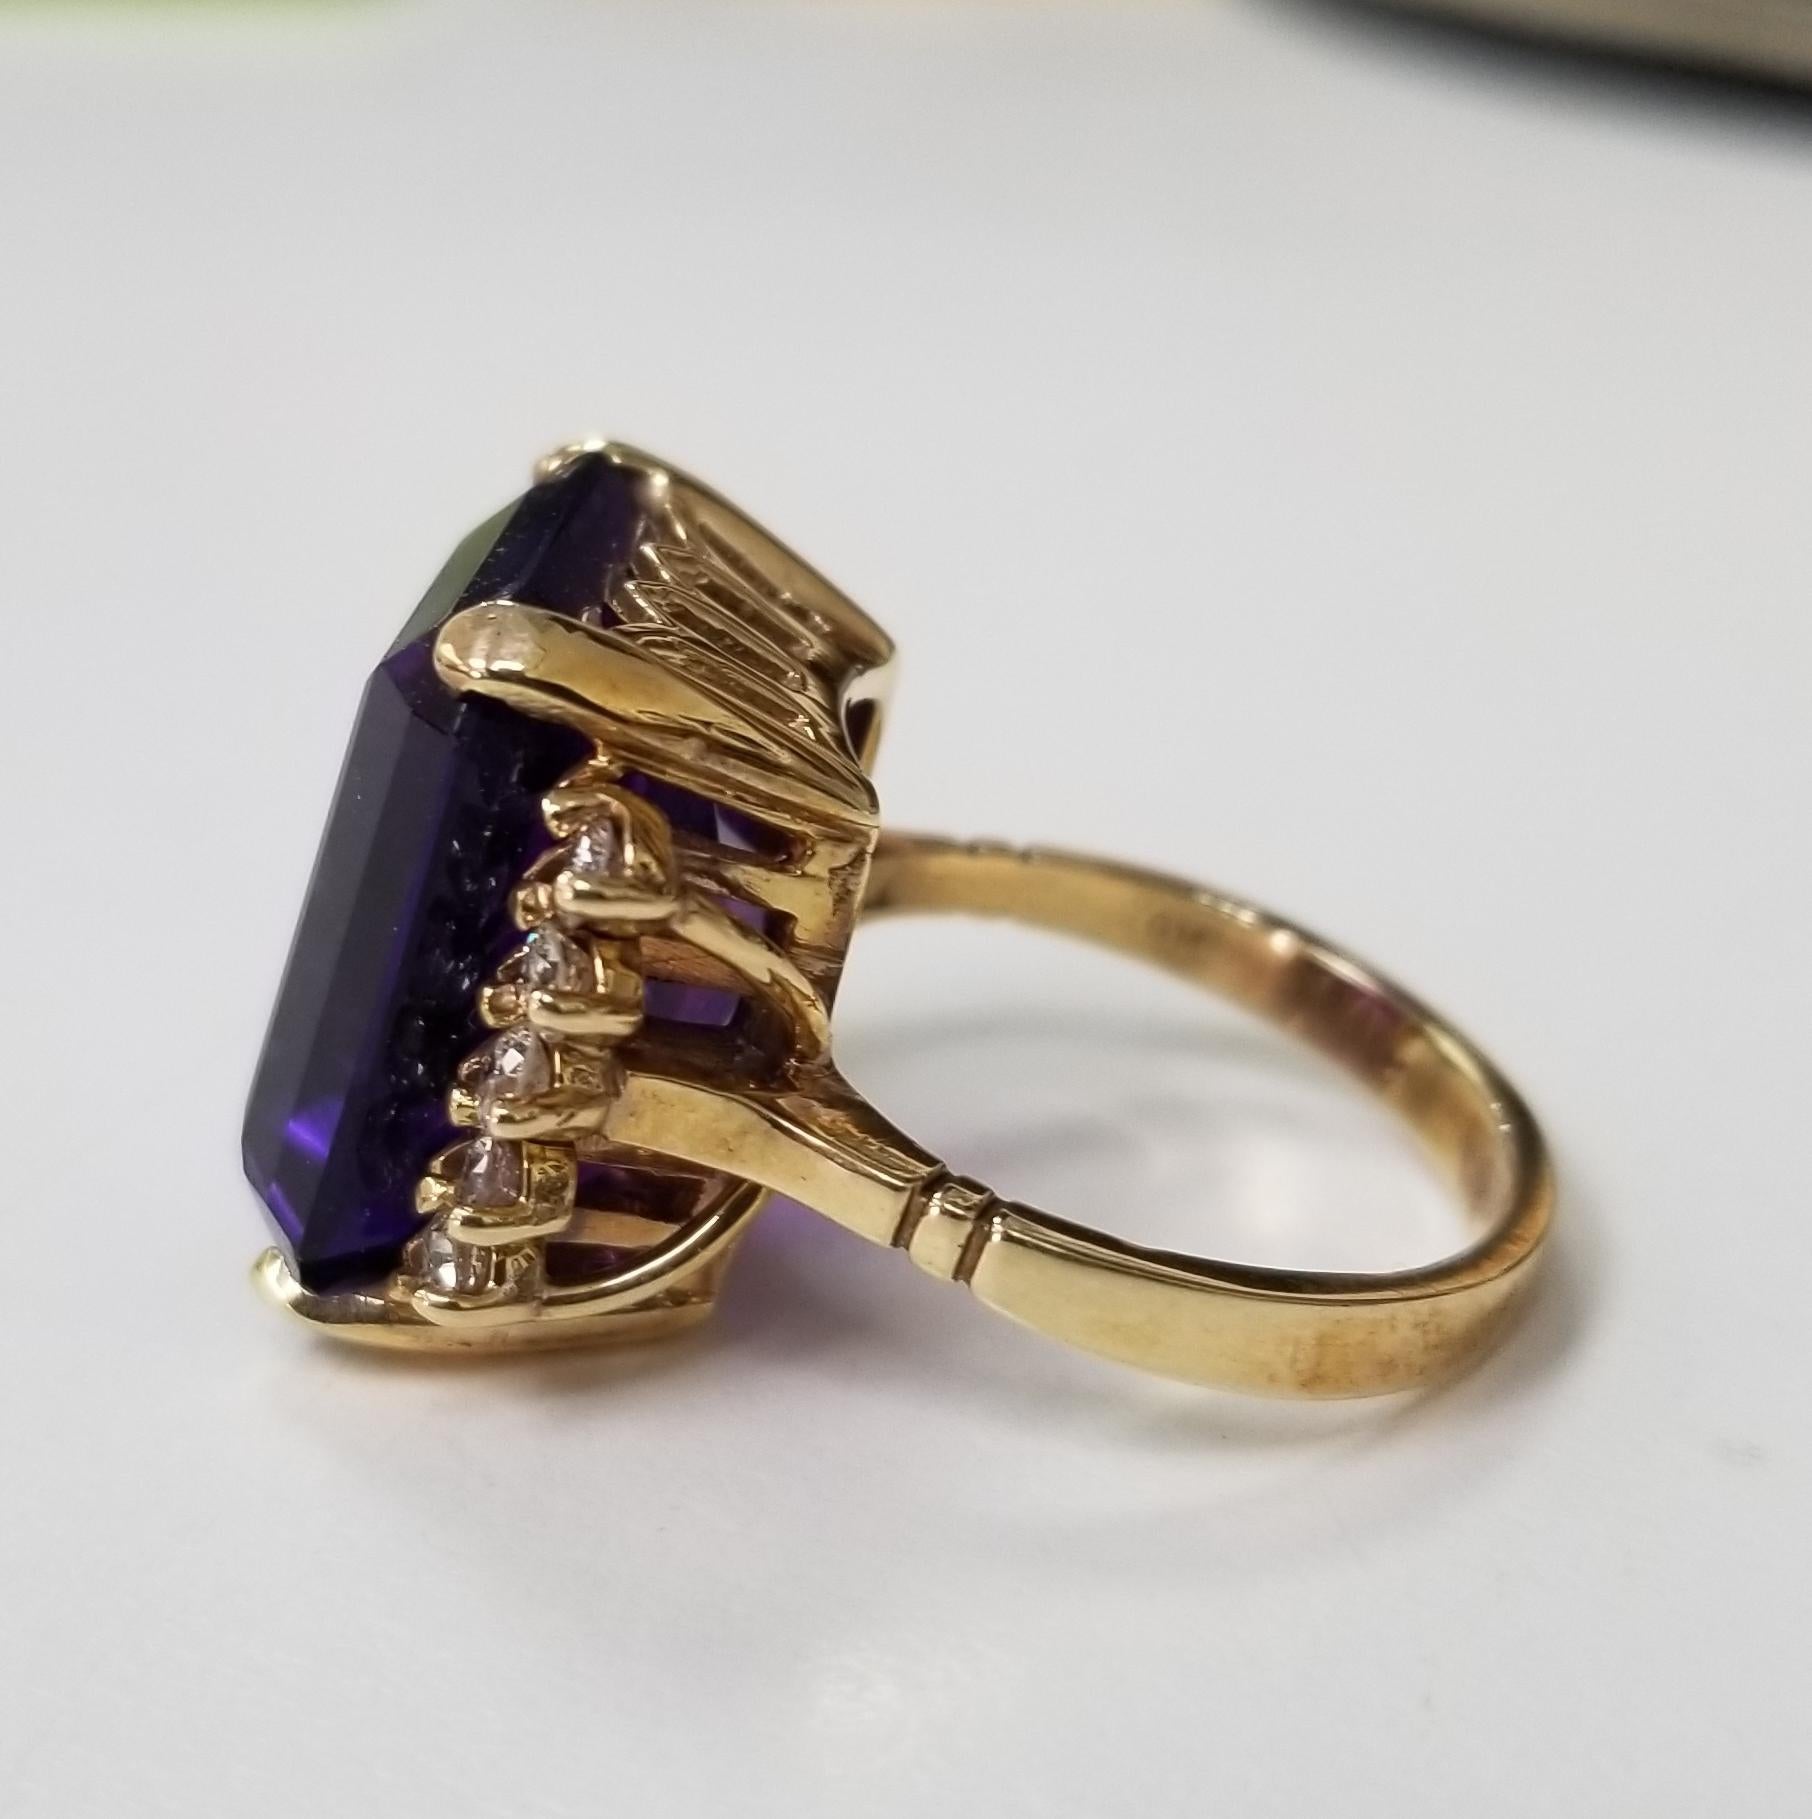 14k yellow gold amethyst and diamond ring, containing 1 emerald cut  weighing 14cts. and 10 round diamonds weighing .55pts.  This ring is a size 5.75 but we will size to fit for free.